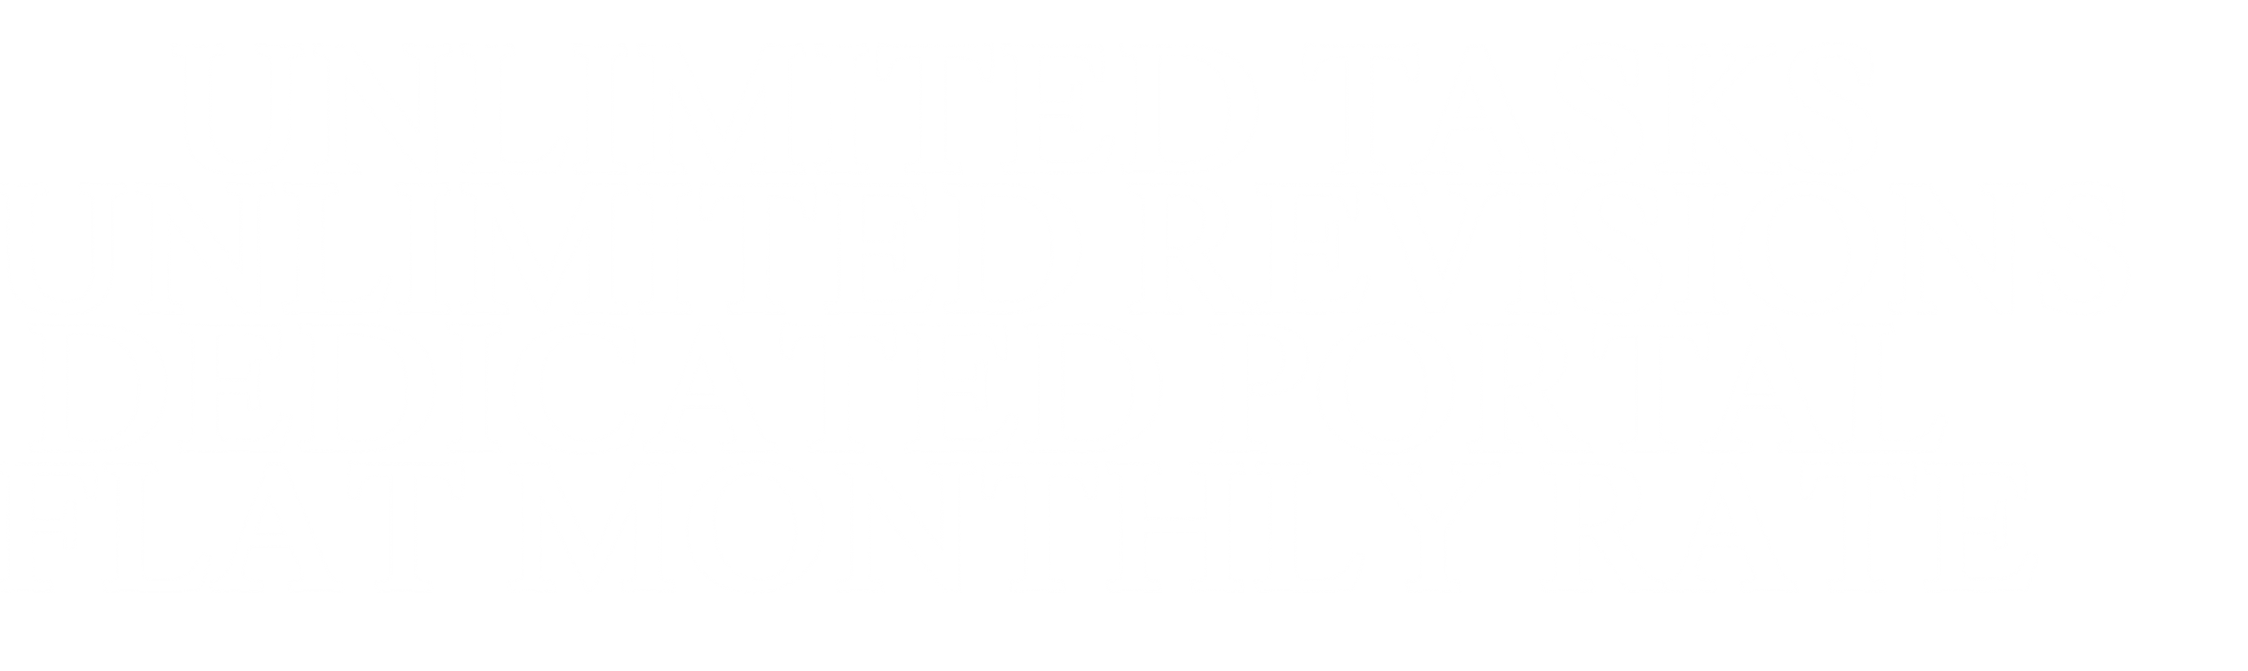 Unlimited tasks unlimited revisions dedicated Portalflat monthly rate